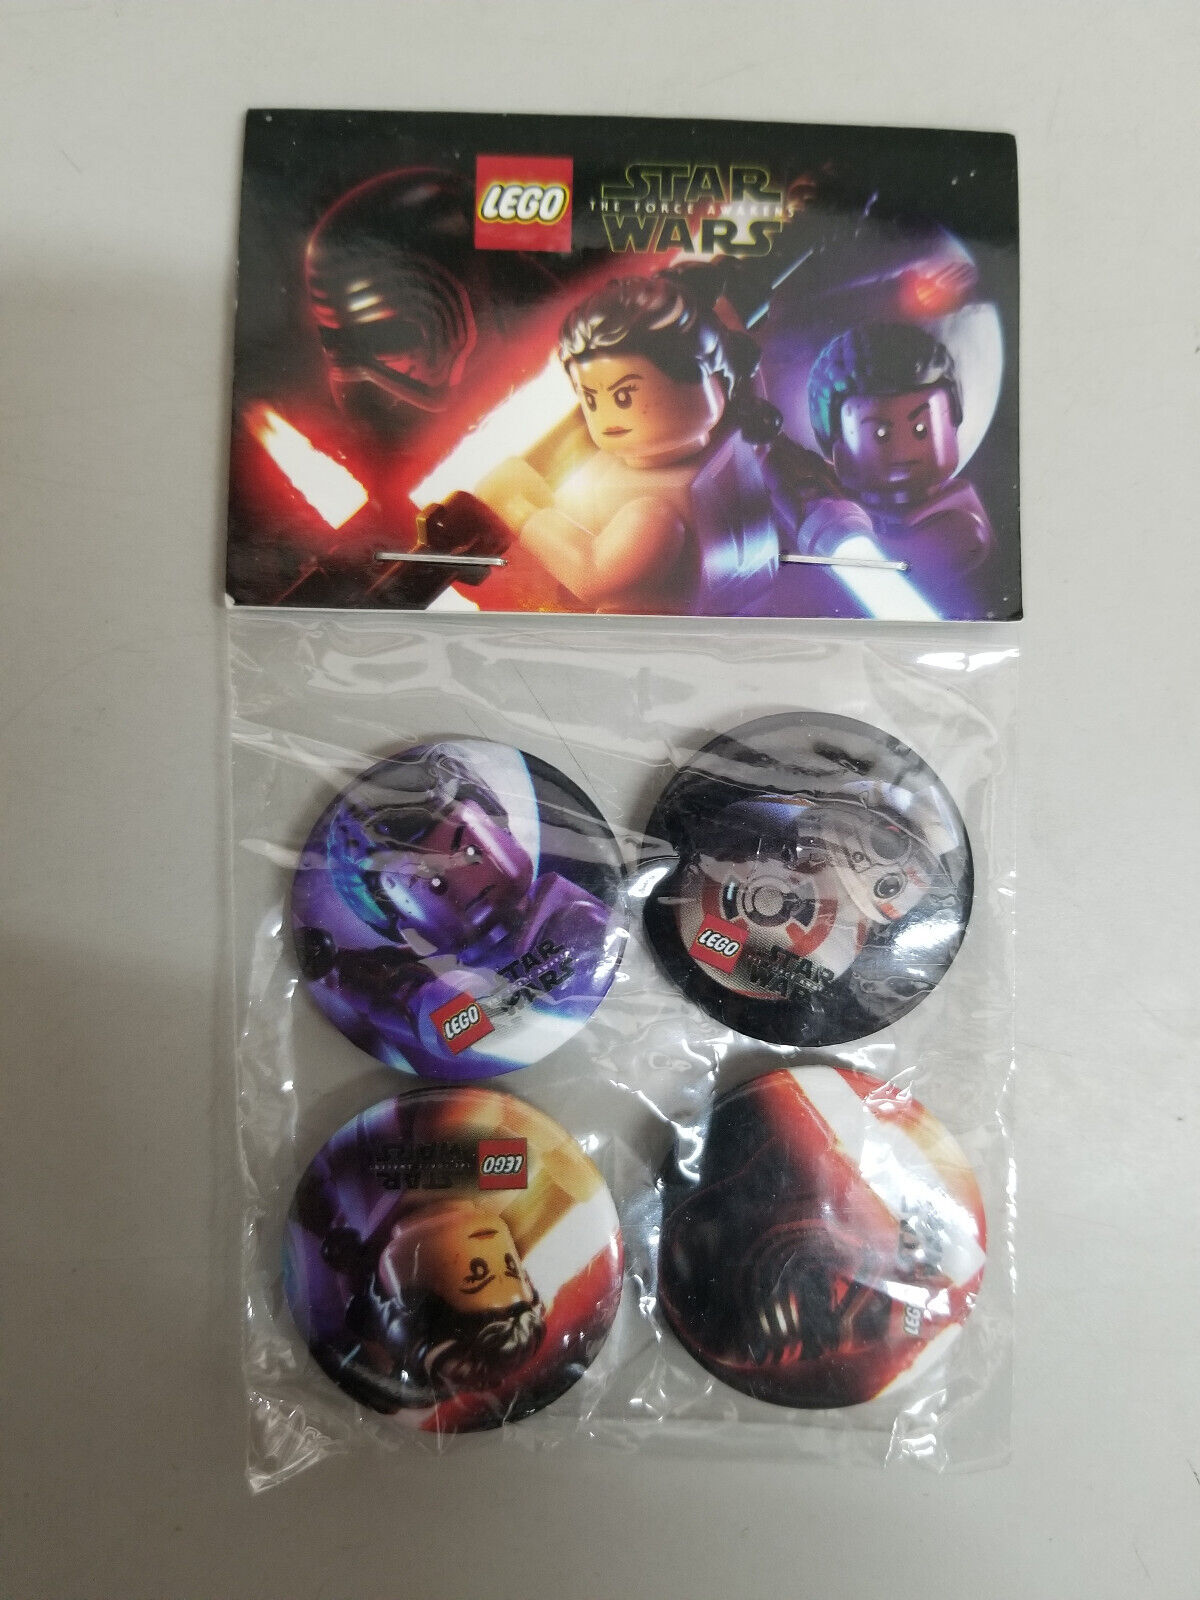 LEGO STAR WARS - THE FORCE AWAKENS, 4 X BUTTON BADGE PIN PACK, OFFICIAL *NEW*